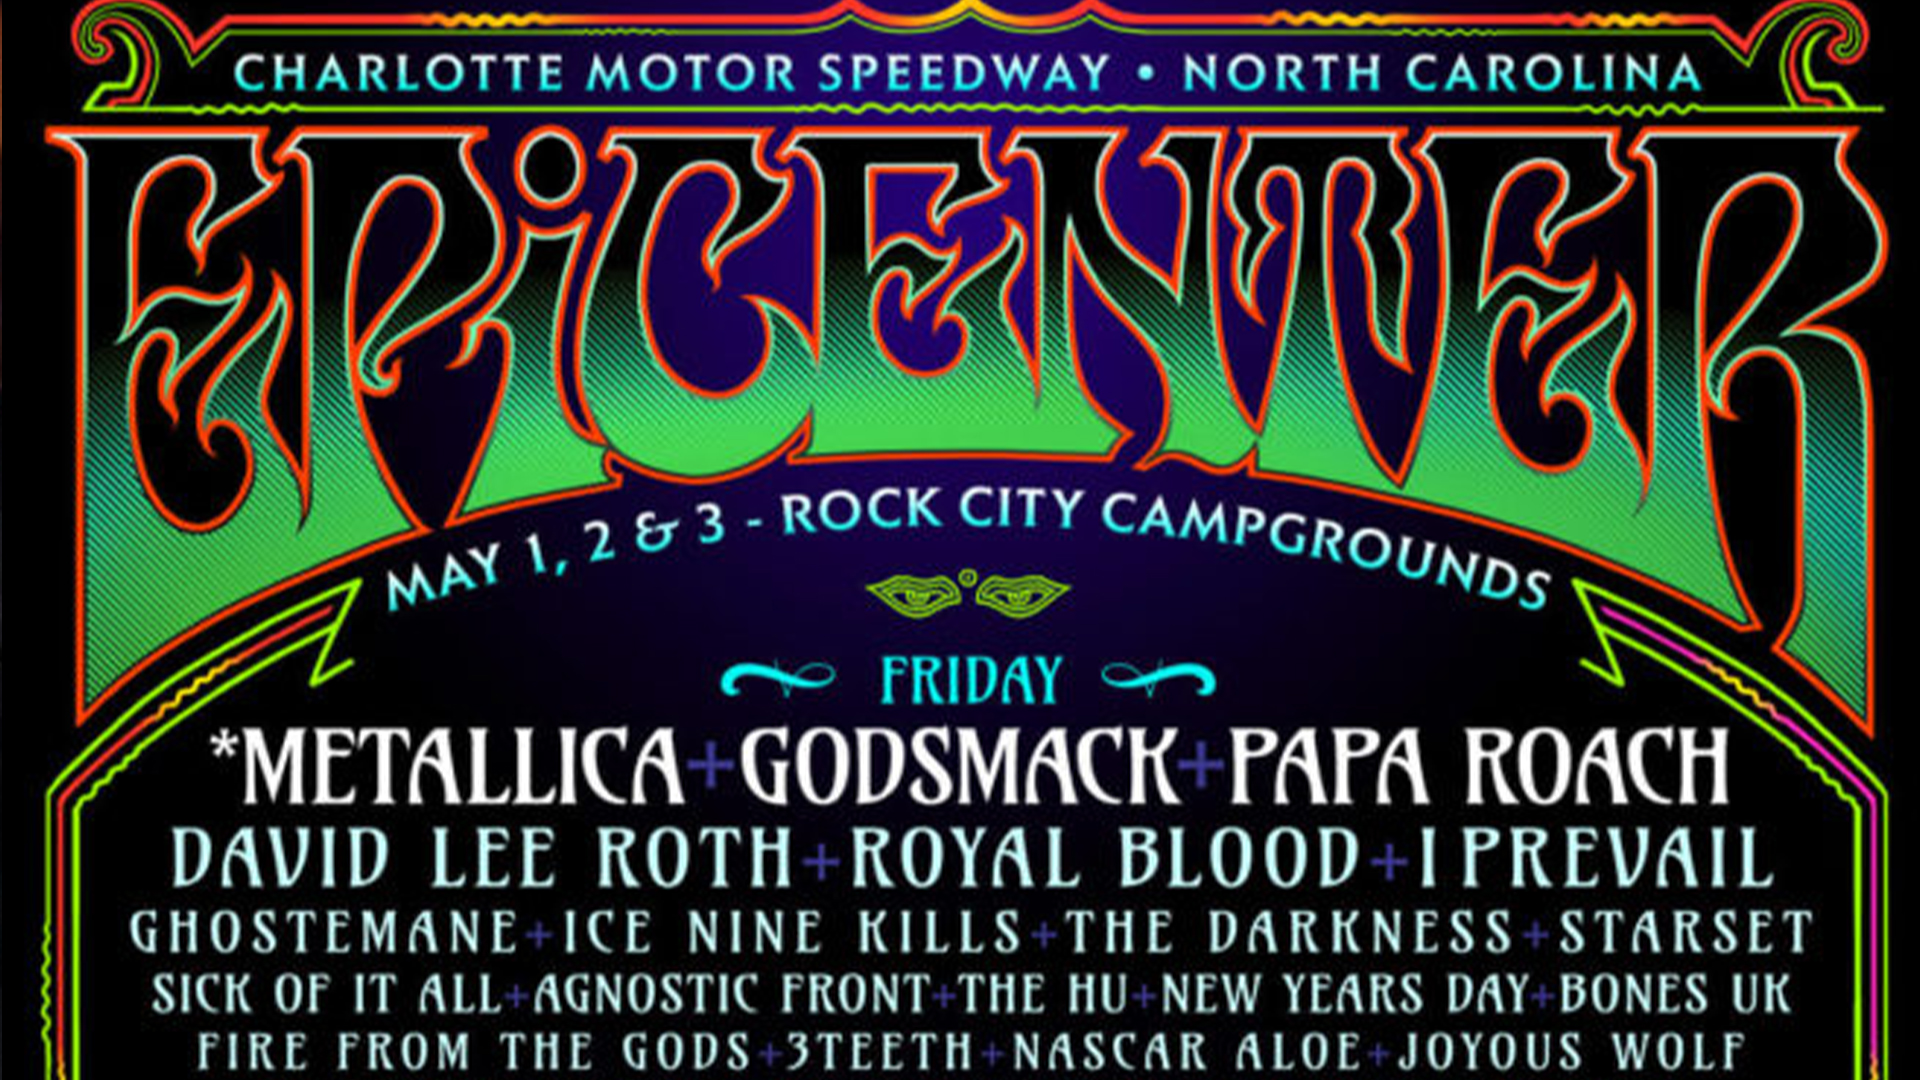 Epicenter Festival Looks For Smoother Year 2 Music, Why Not!